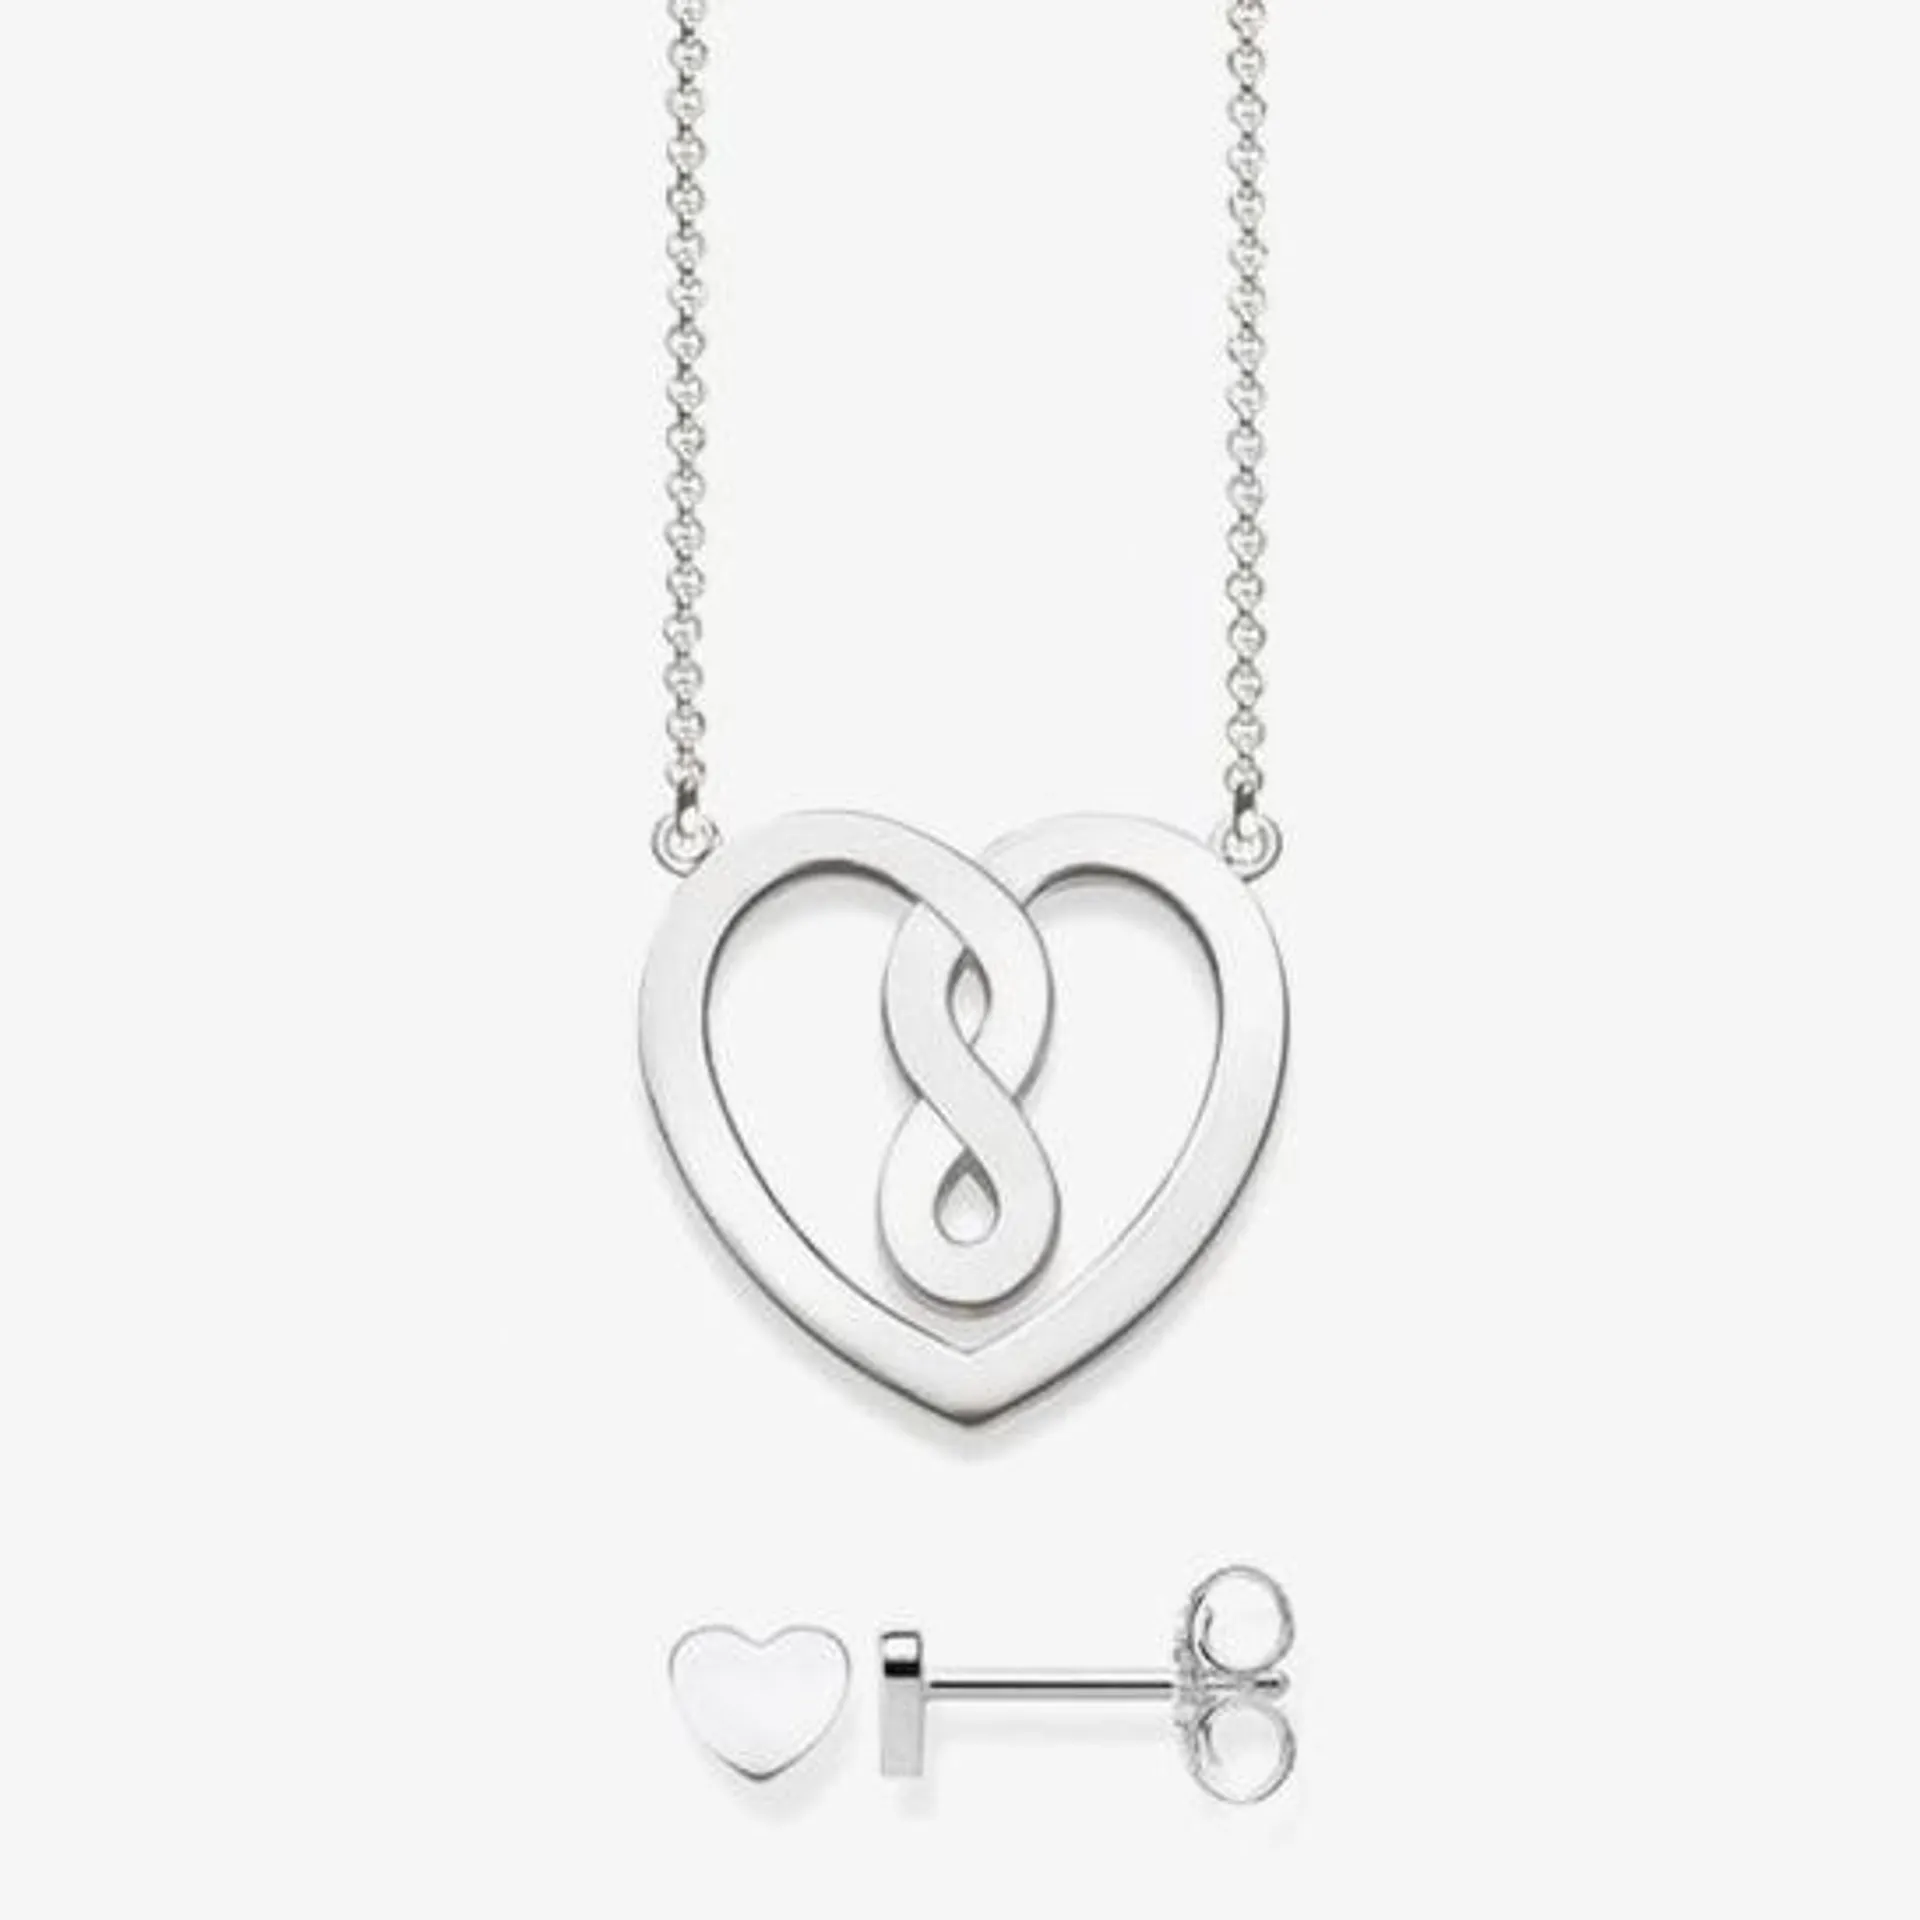 THOMAS SABO Silver Infinity Heart Necklace and Stud Earrings Set SET0557-001-21-L42V